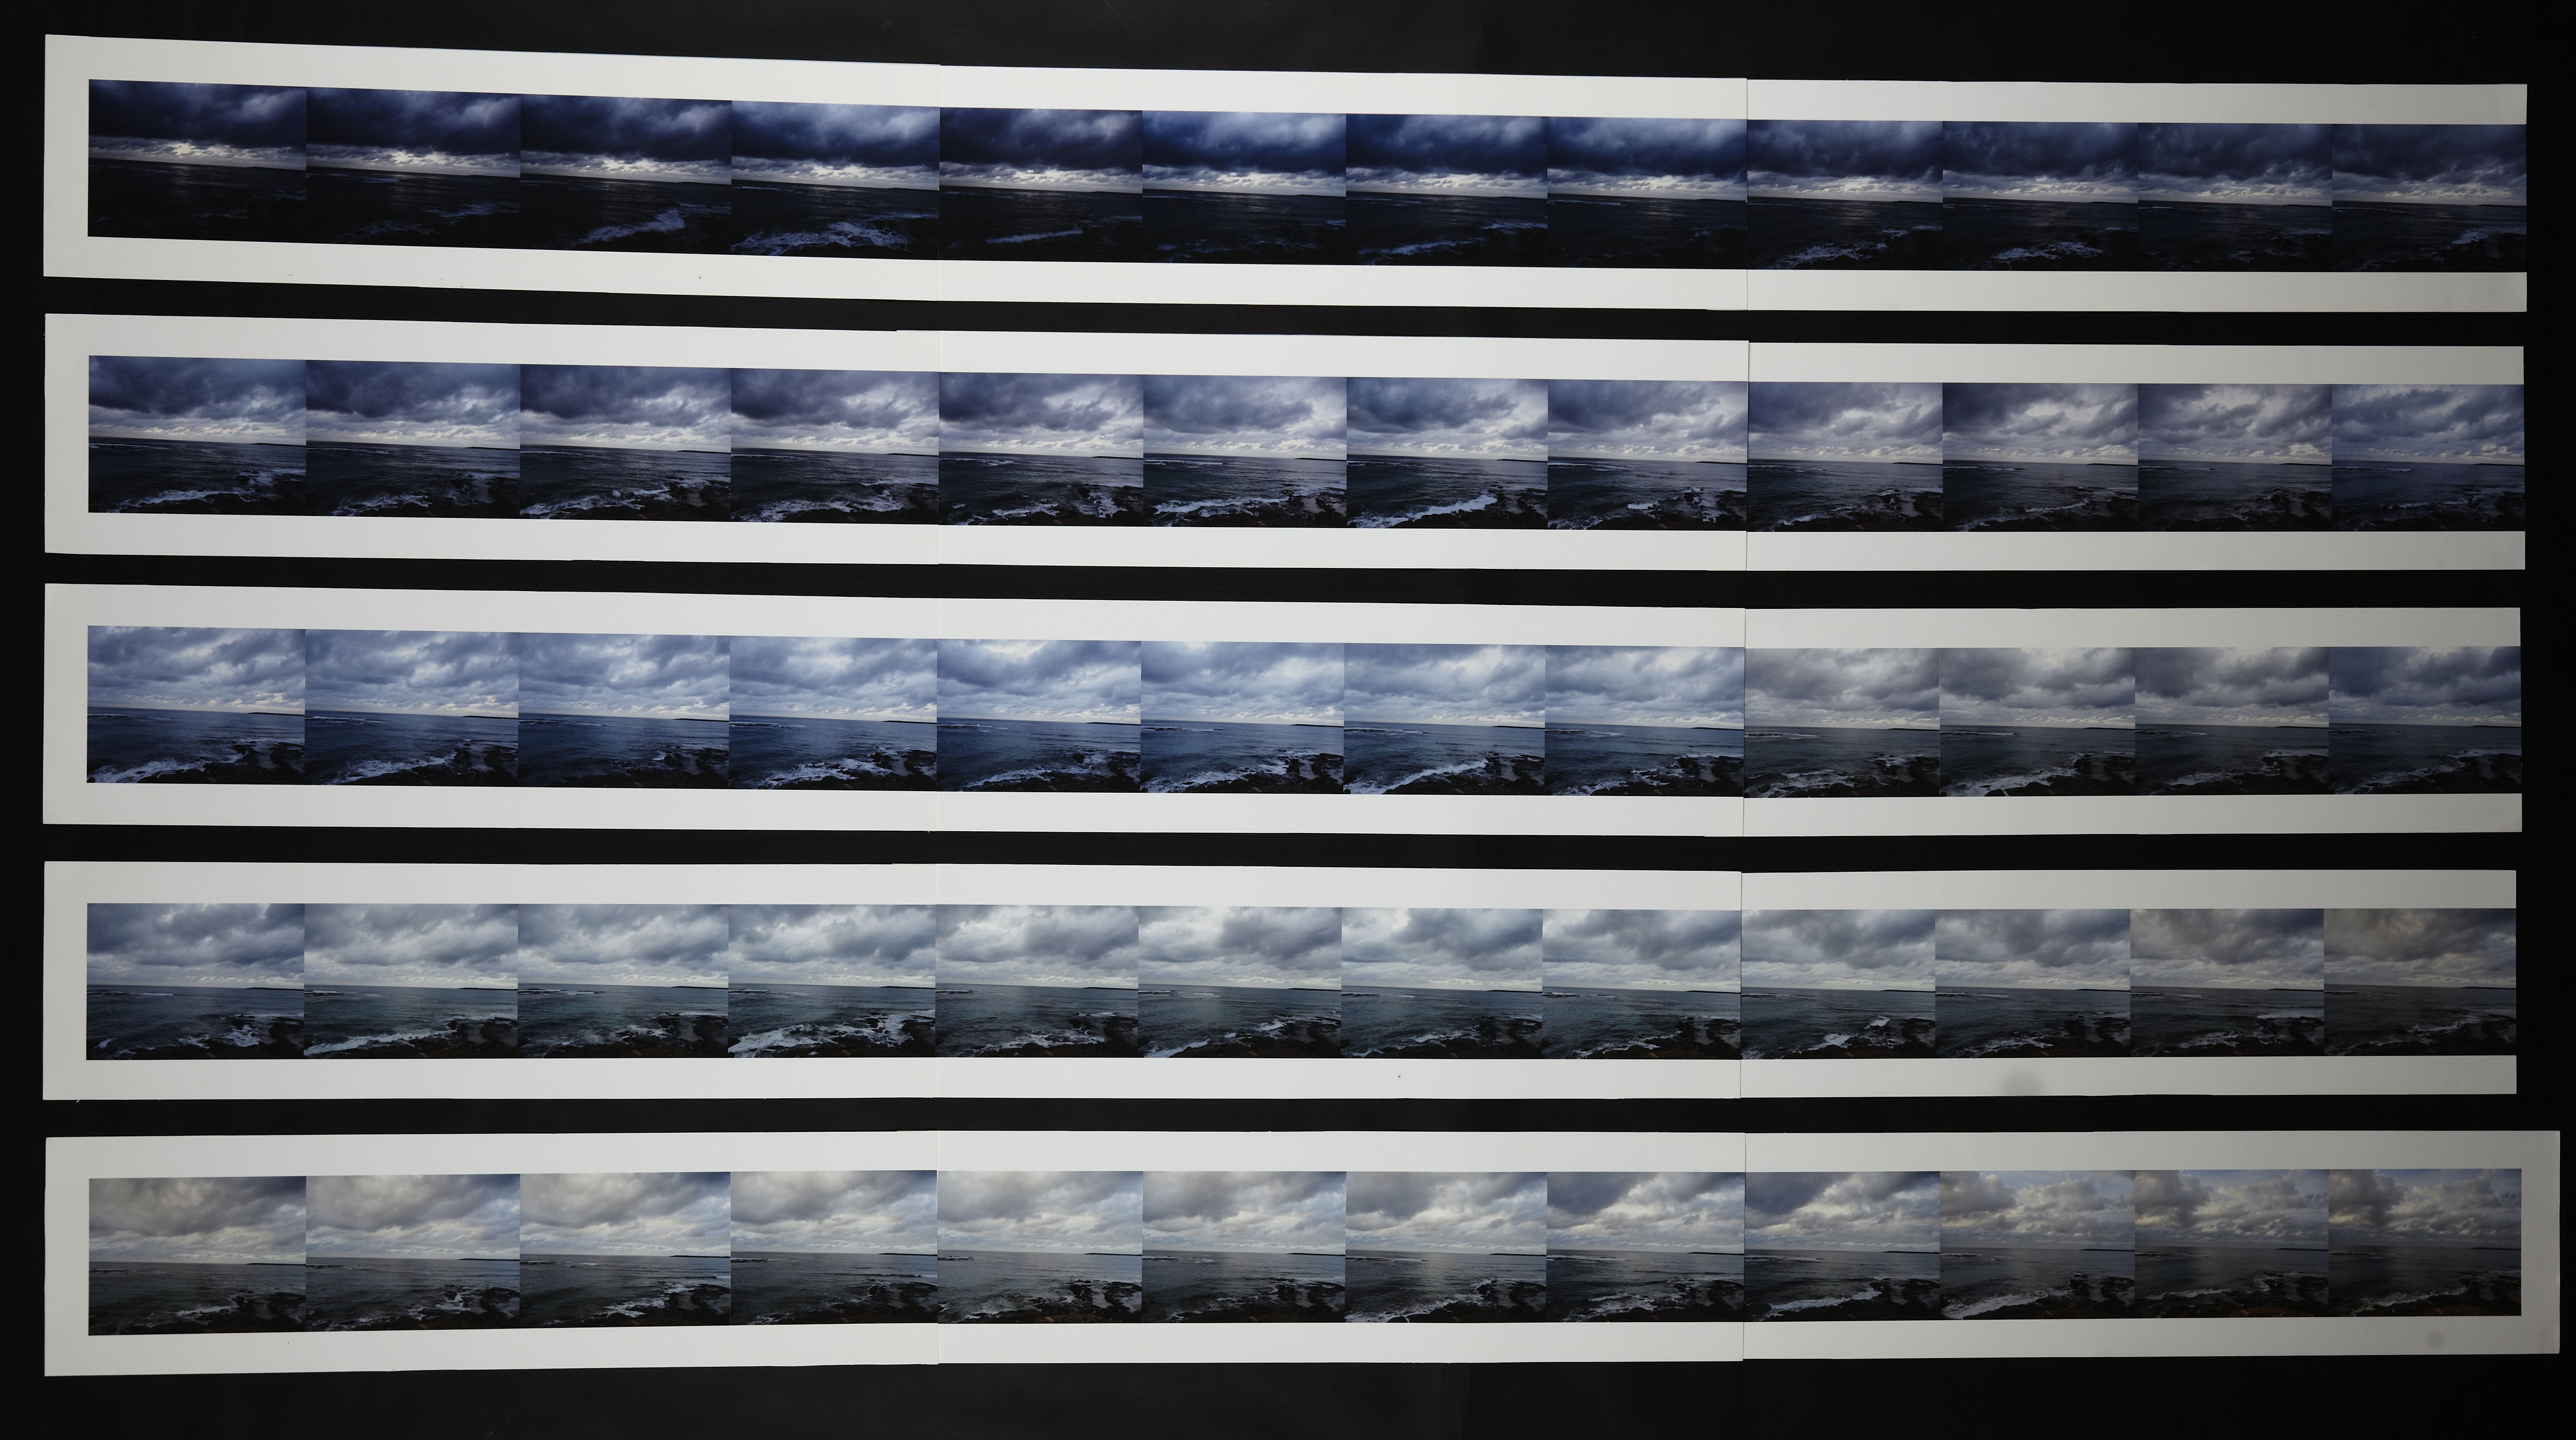 Five rows of repeating overlapping photographs of the ocean.